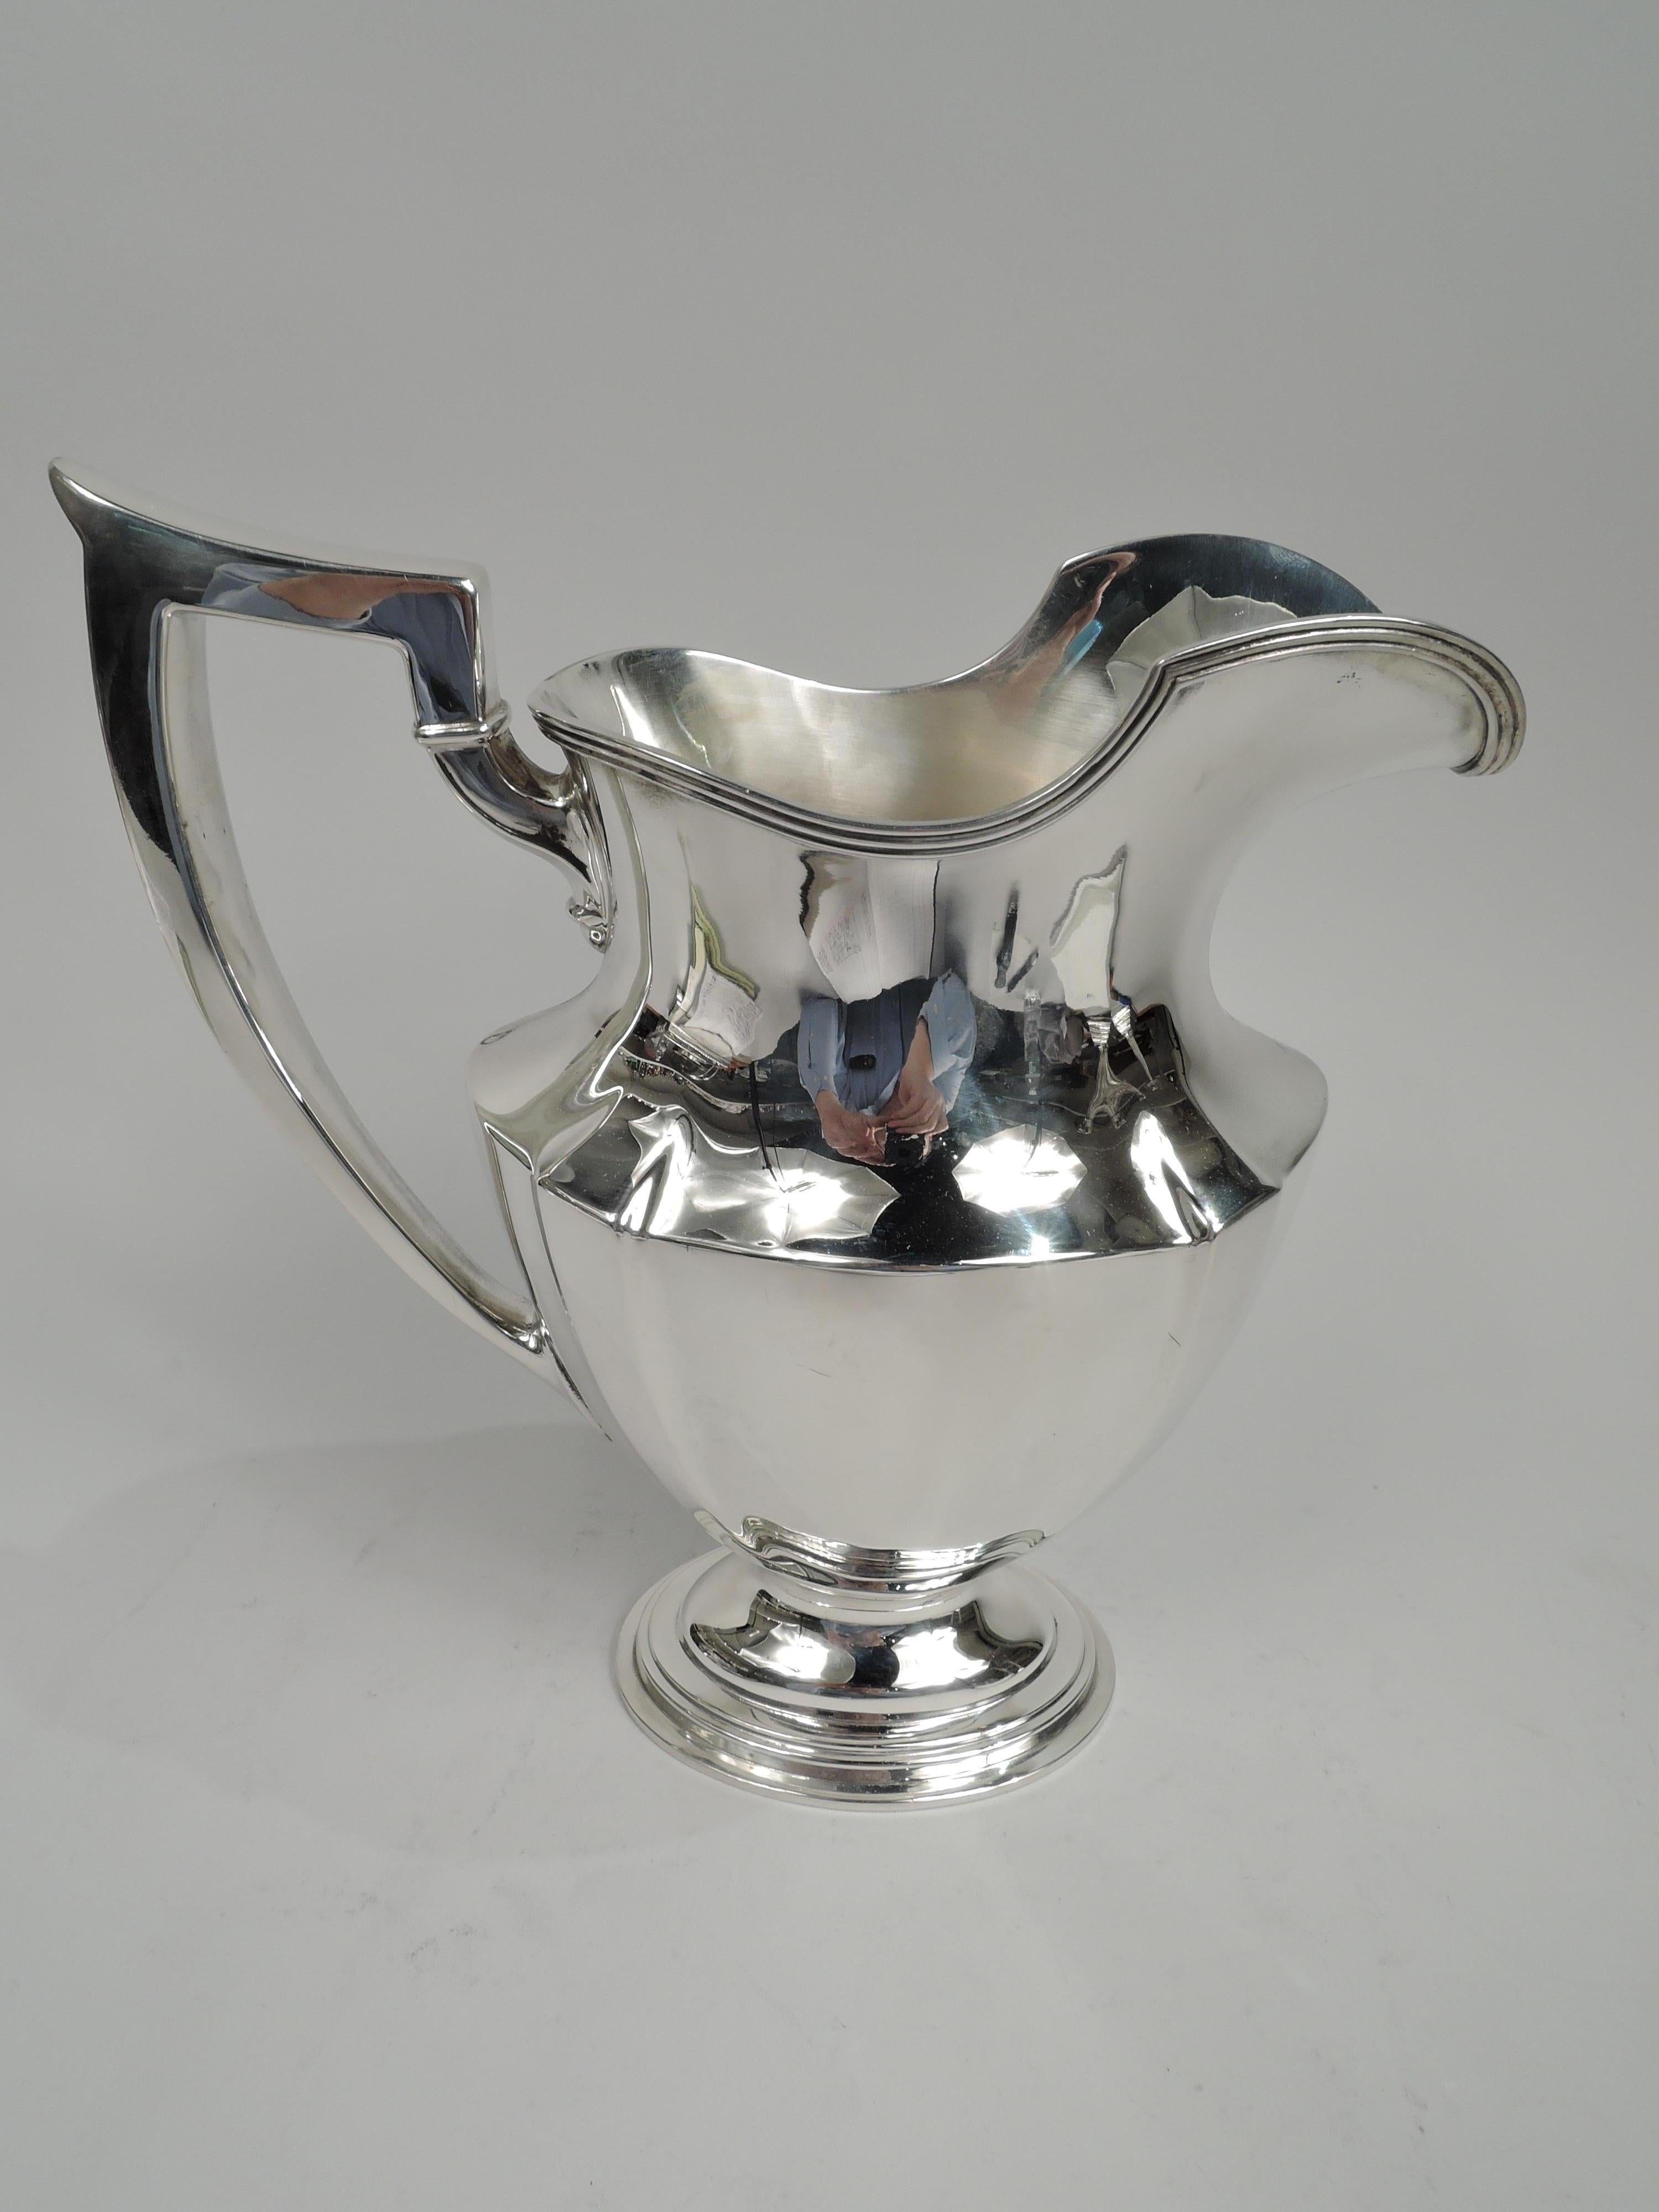 Plymouth sterling silver water pitcher. Made by Gorham in Providence in 1948. Tapering and paneled ovoid body, reeded helmet mouth, capped scroll bracket handle, and stepped oval foot. A nice piece in the classic pattern. Fully marked including